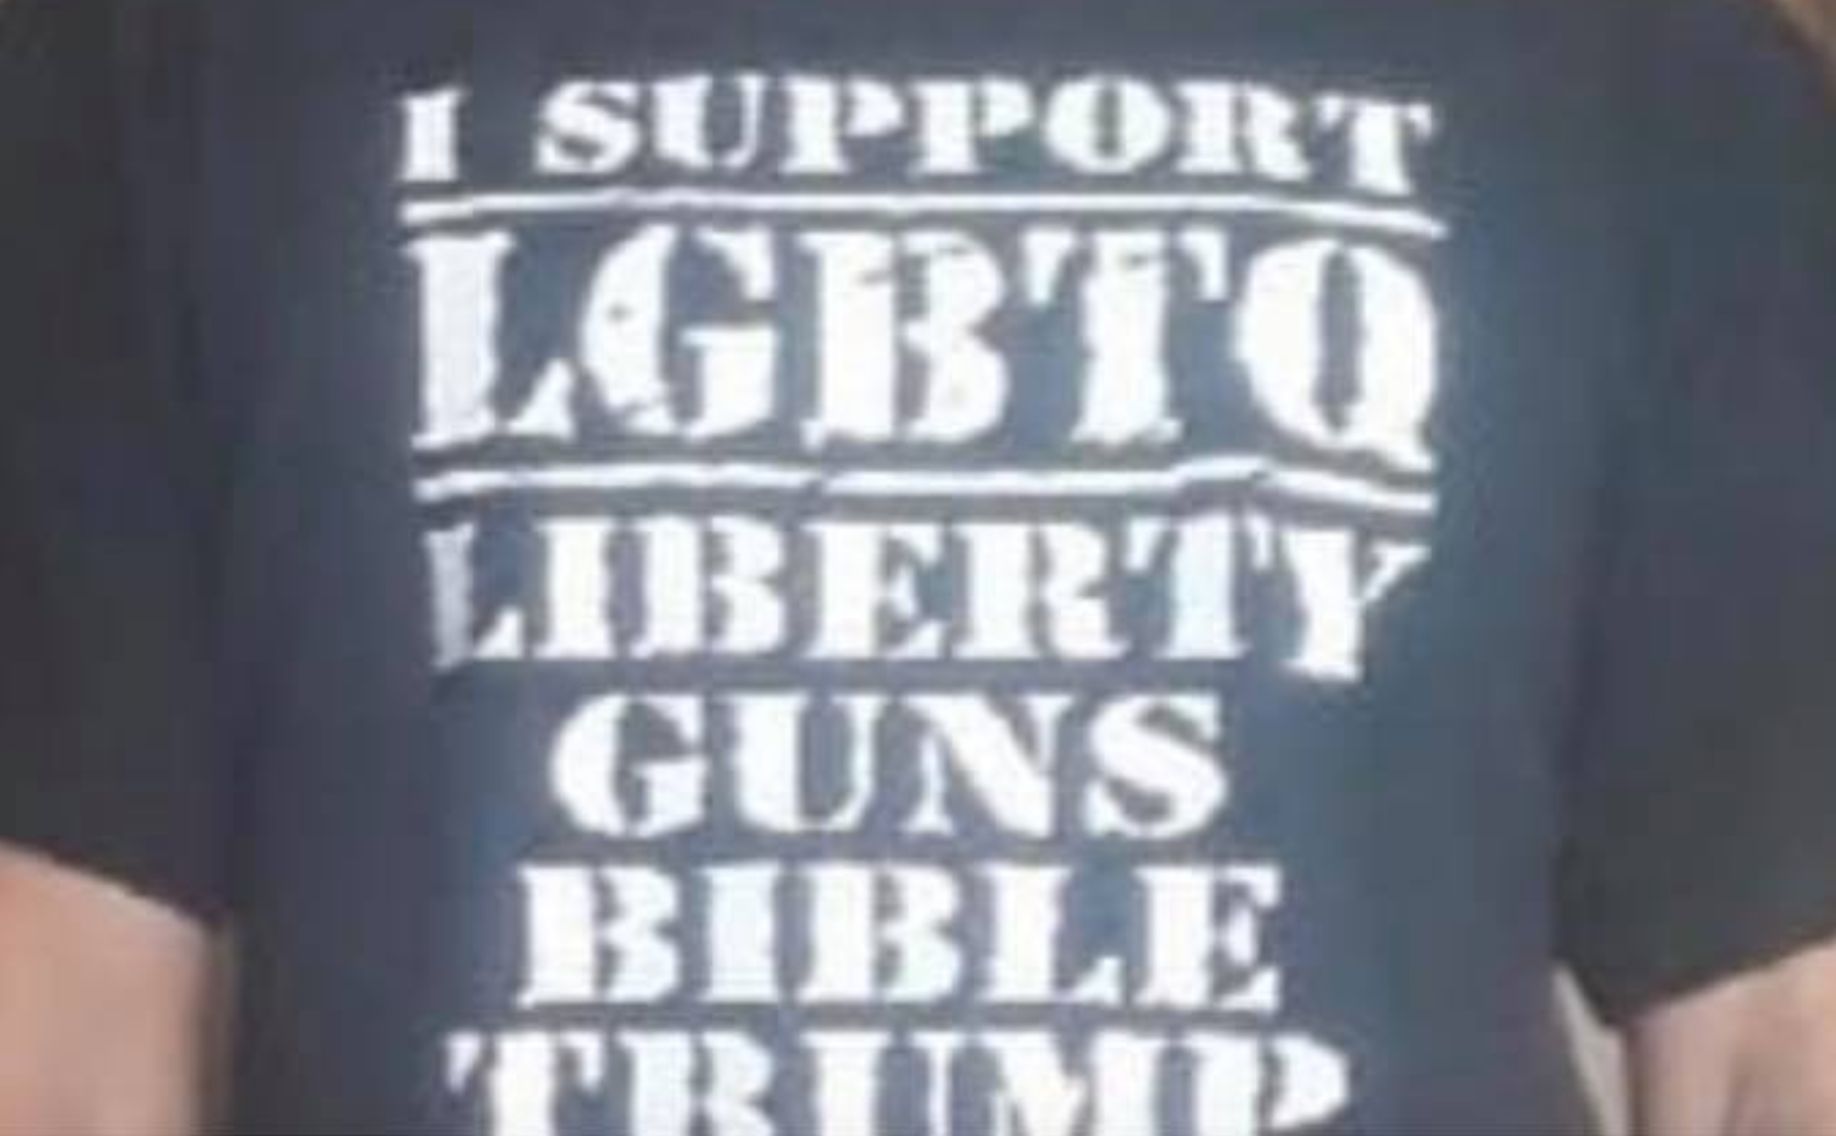 A food truck owner faced backlash after advertising a T-Shirt that said, "I support LGBTQ. Liberty, guns, bible, Trump, BBQ." (Photo: Facebook)